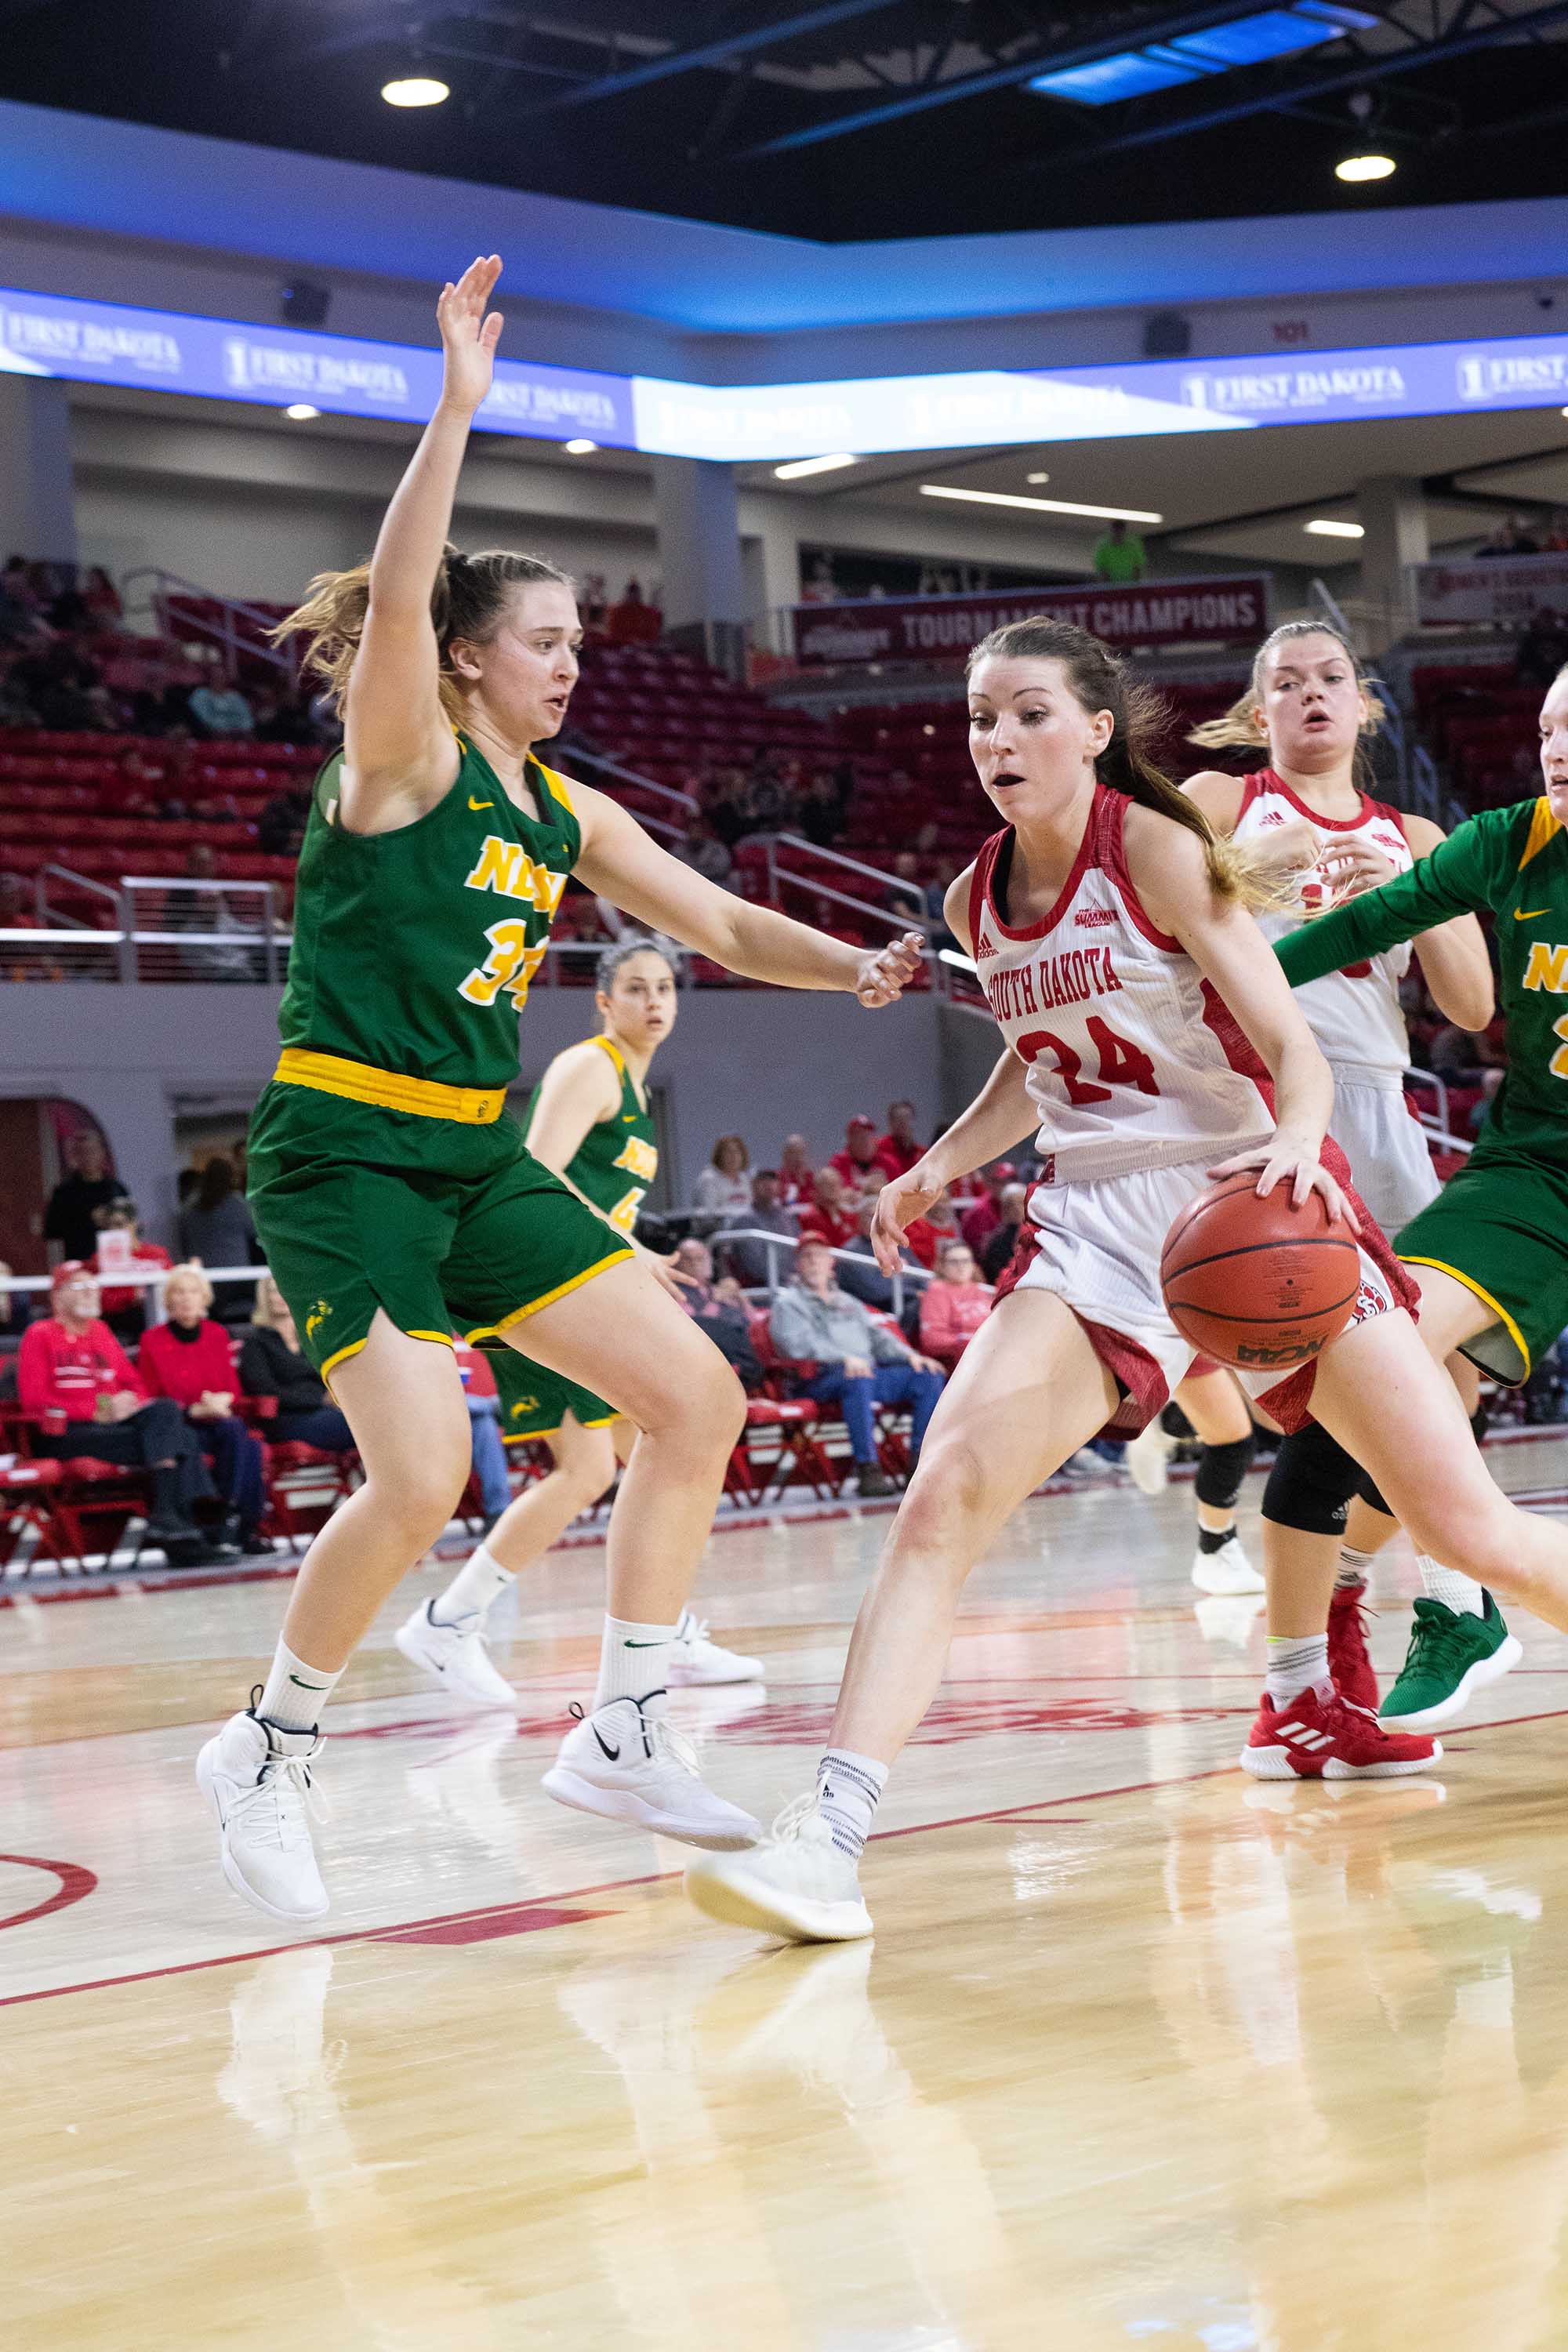 Takeaways from the historic Coyote WBB 2018-19 season